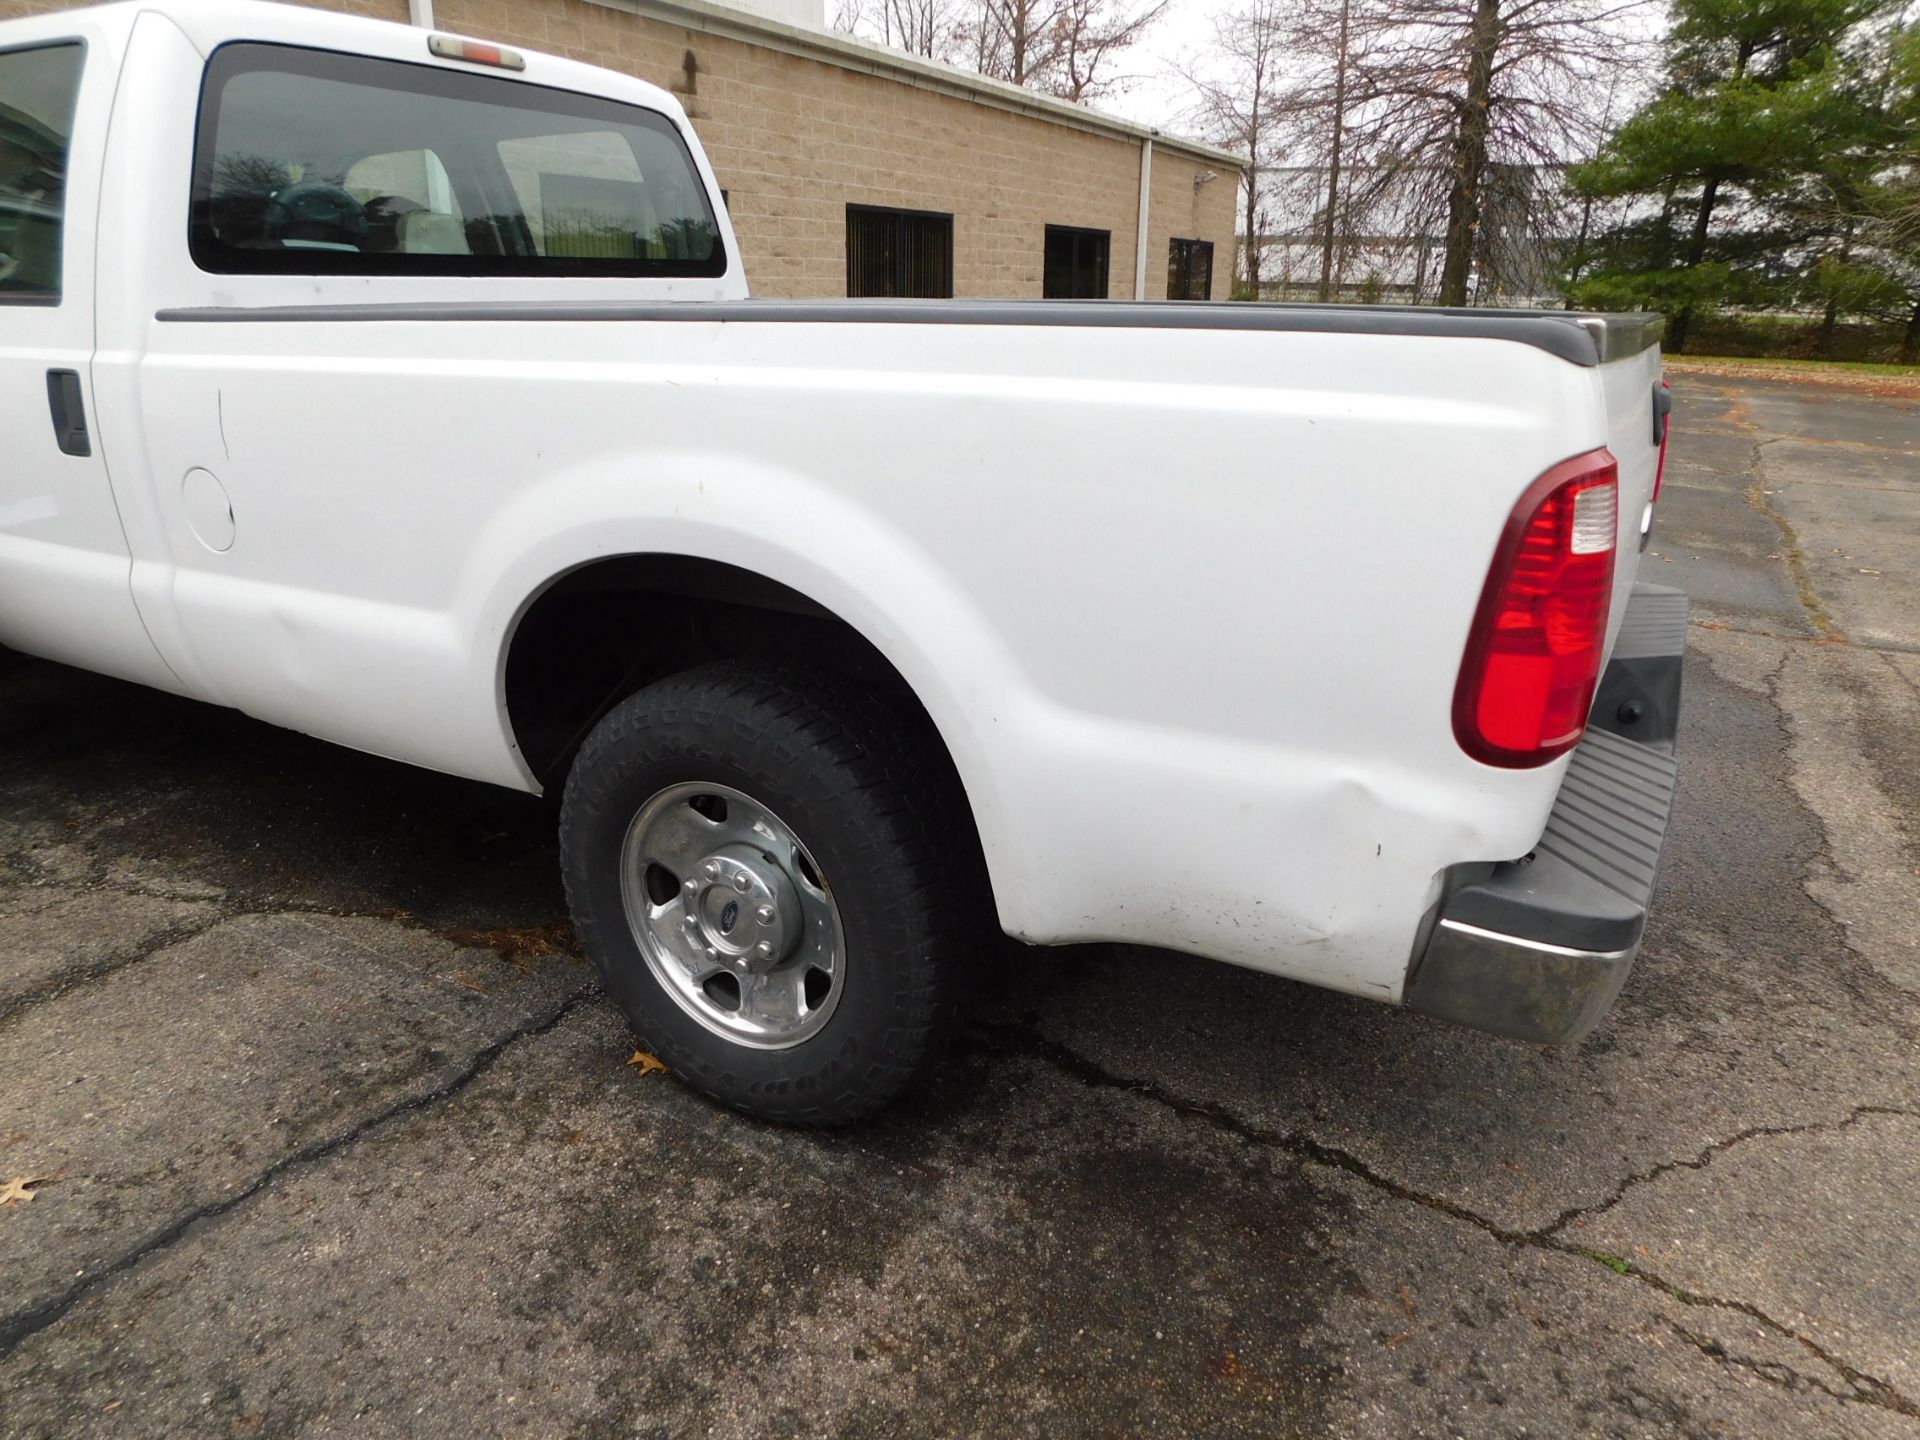 2008 Ford F250XL Super Duty Pick Up Truck, VIN 1FTSW20548EB51209, Crew Cab, Automatic, 8' Bed, 190, - Image 7 of 36